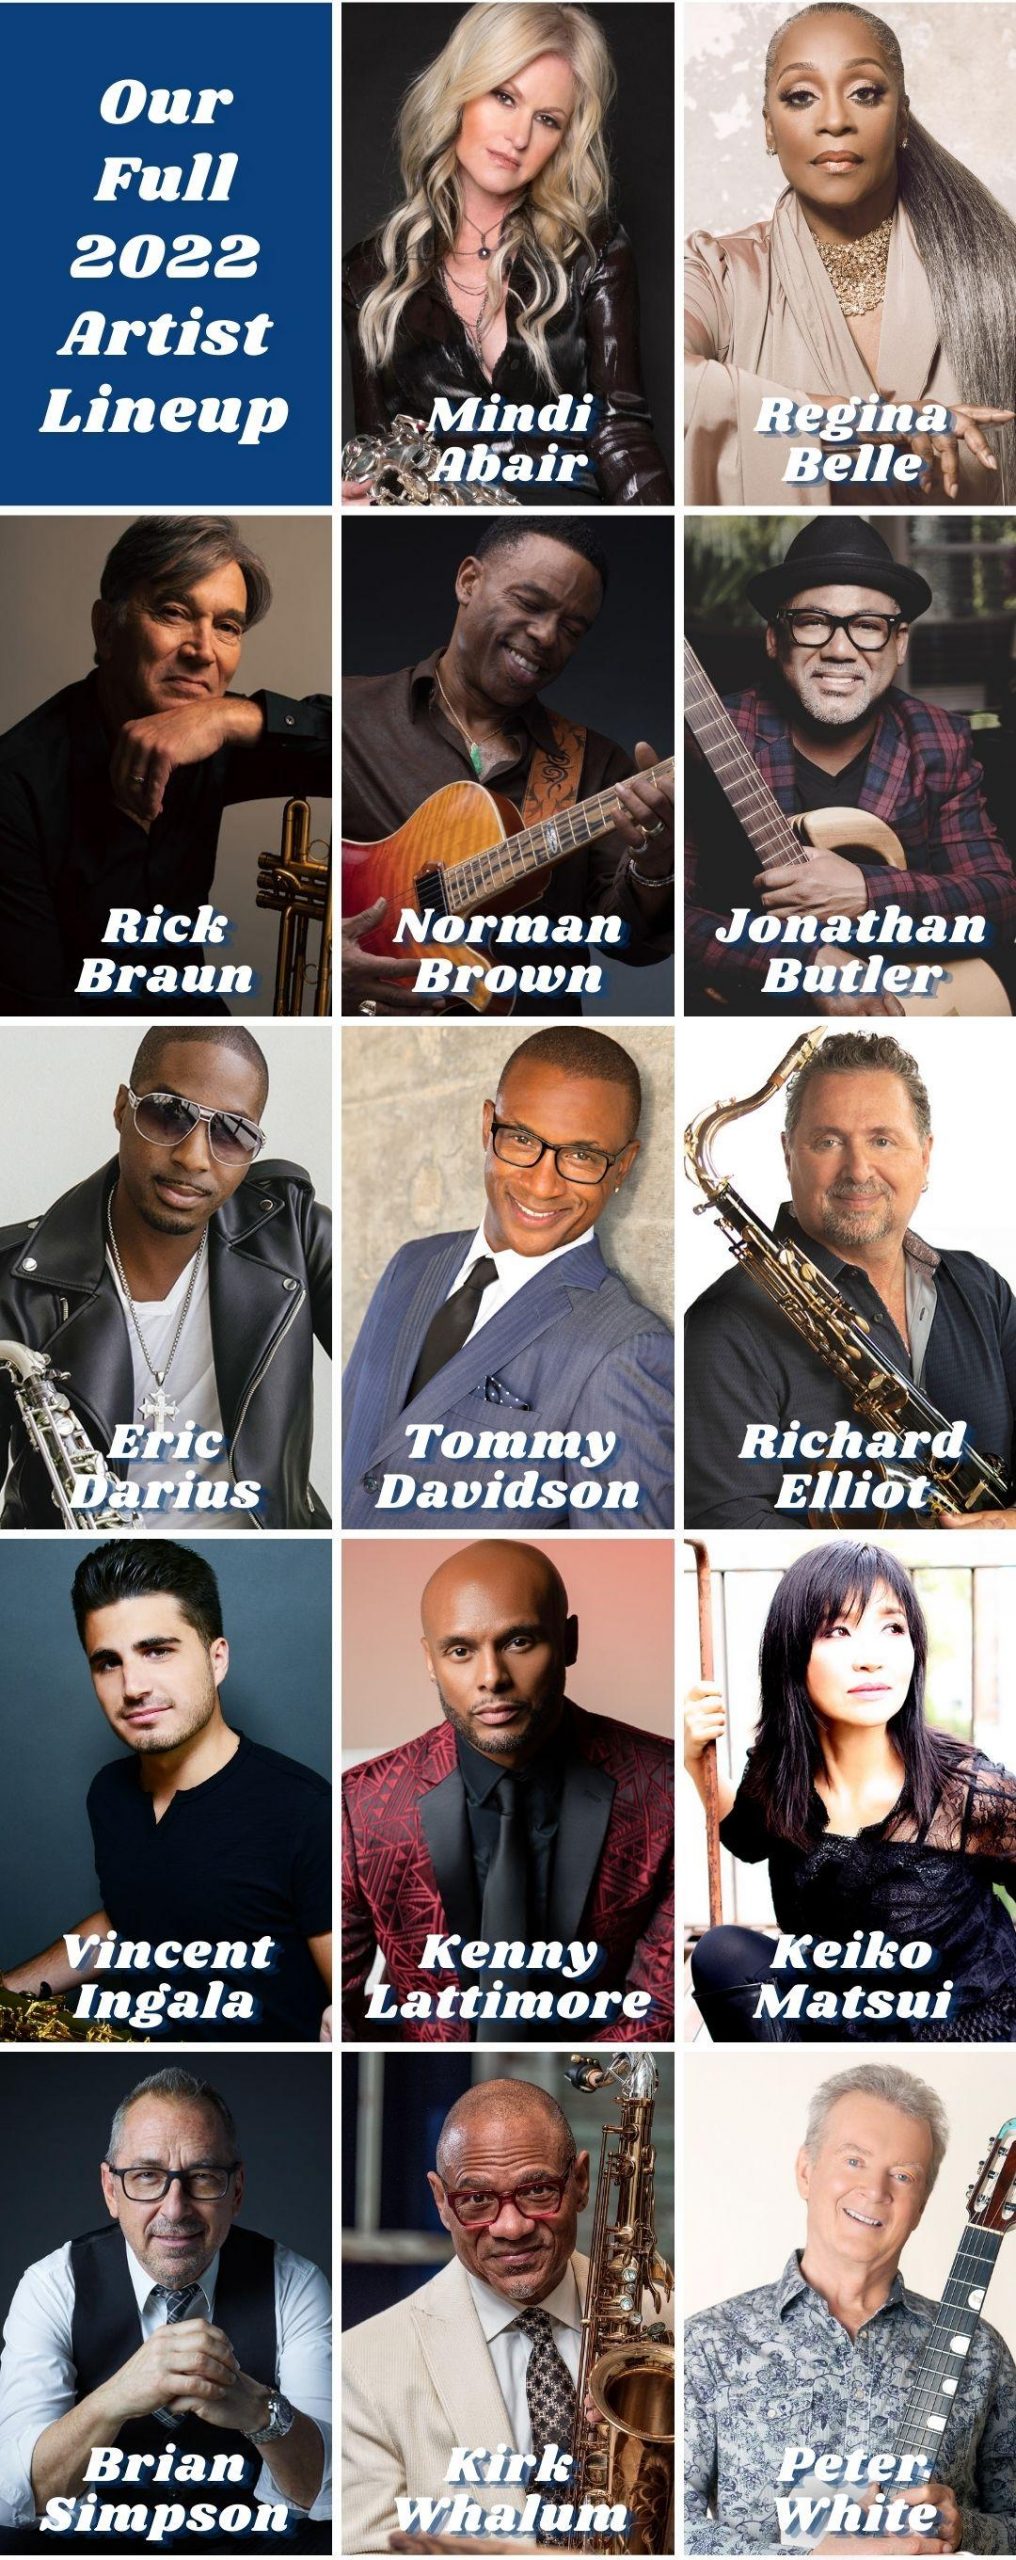 Dave Koz and Friends At Sea 2022 Featured Artists